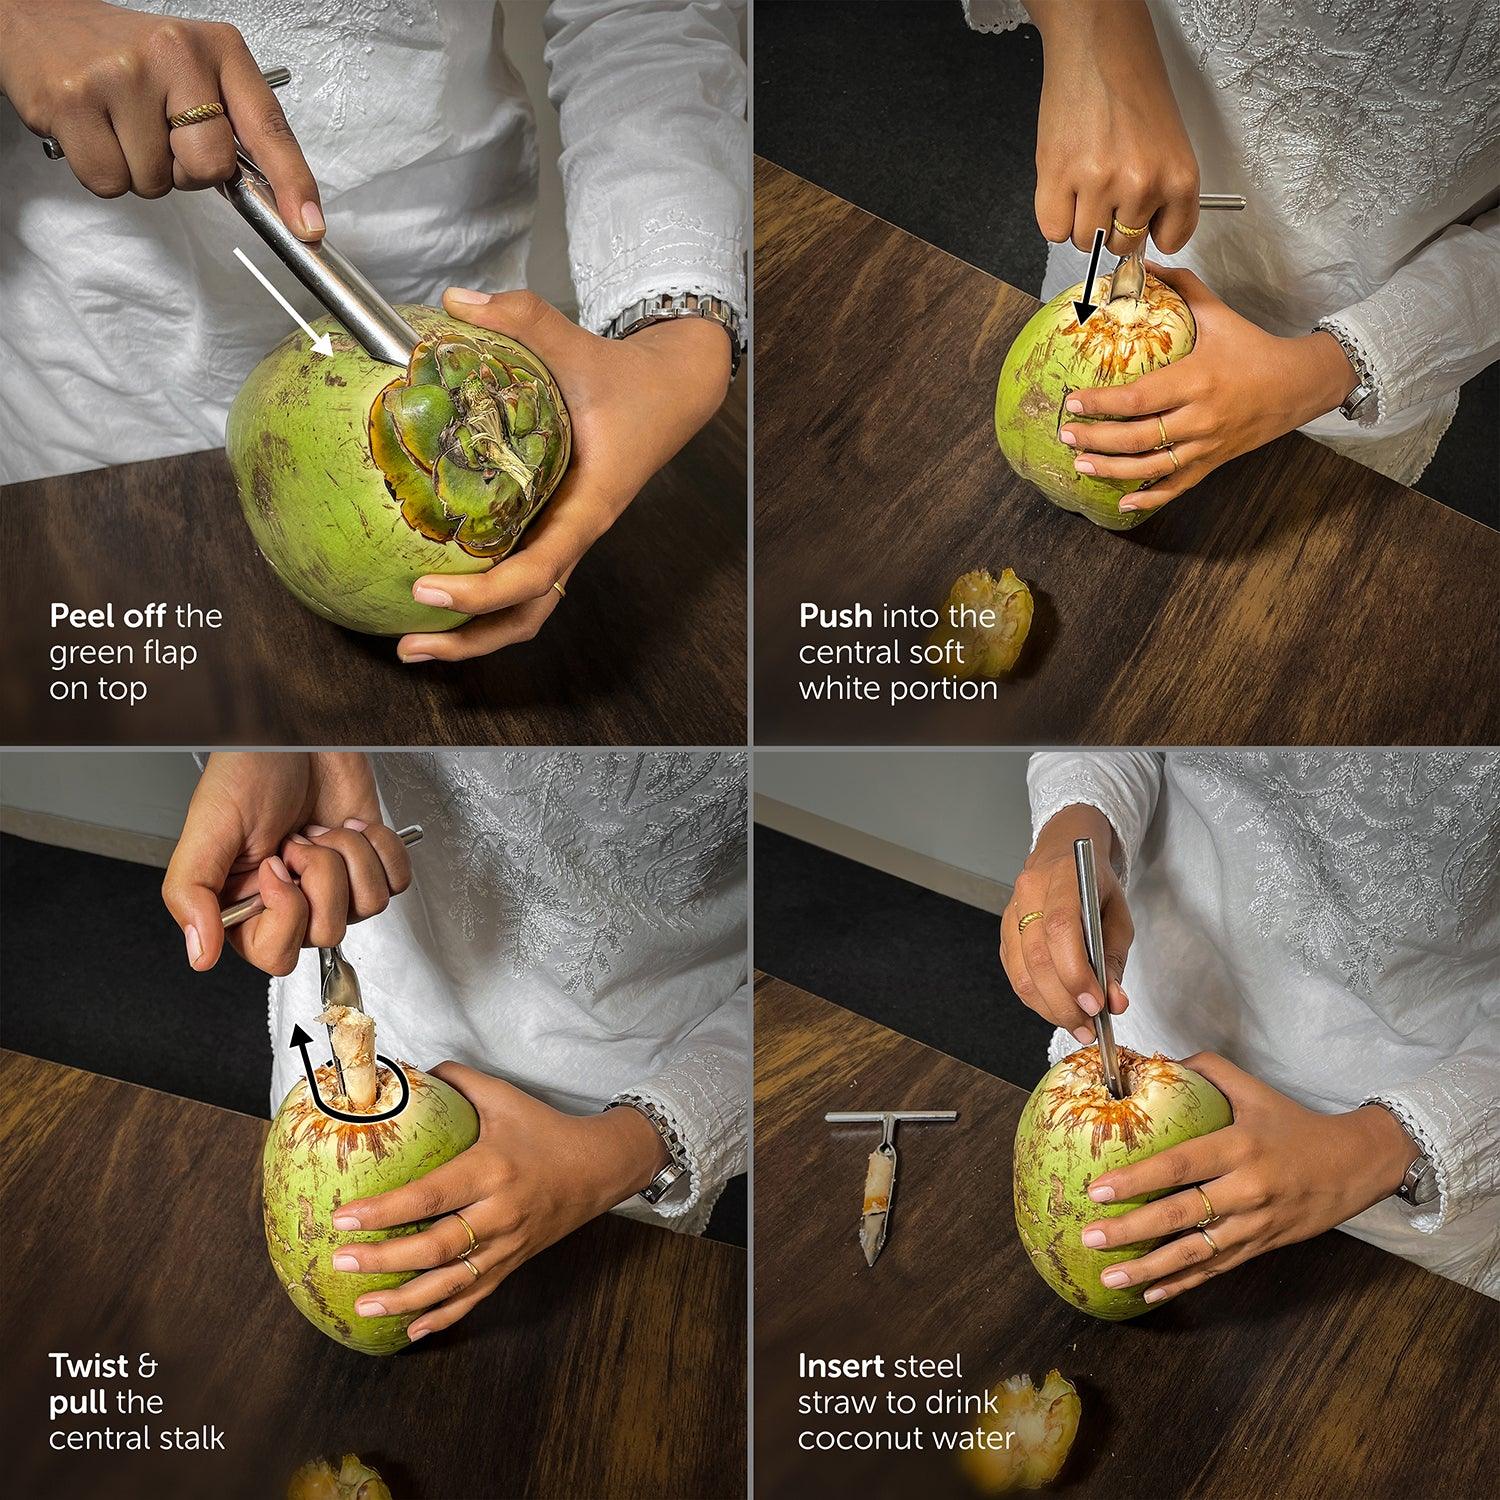 Peel off the green flap on top, Push into the: central soft white portion, Twist & pull the central stalk, Insert steel straw to drink coconut water